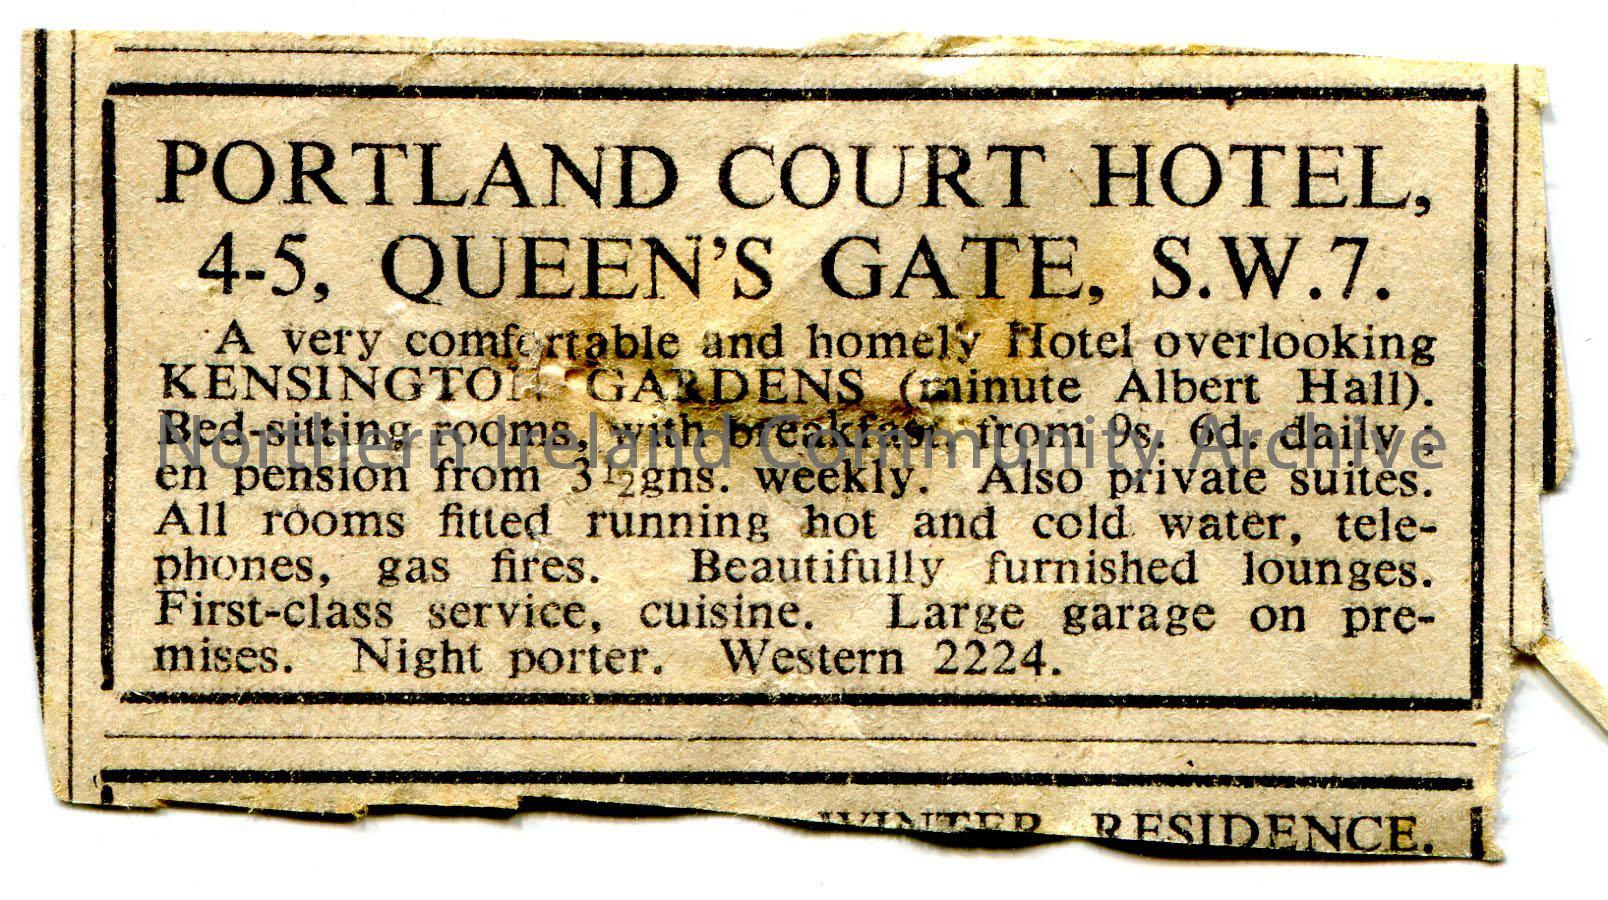 Advertisement cut out of newspaper for a hotel in London, Kensington Gardens, Portland Court Hotel, 4-5 Queen’s Gate, S.W.7.